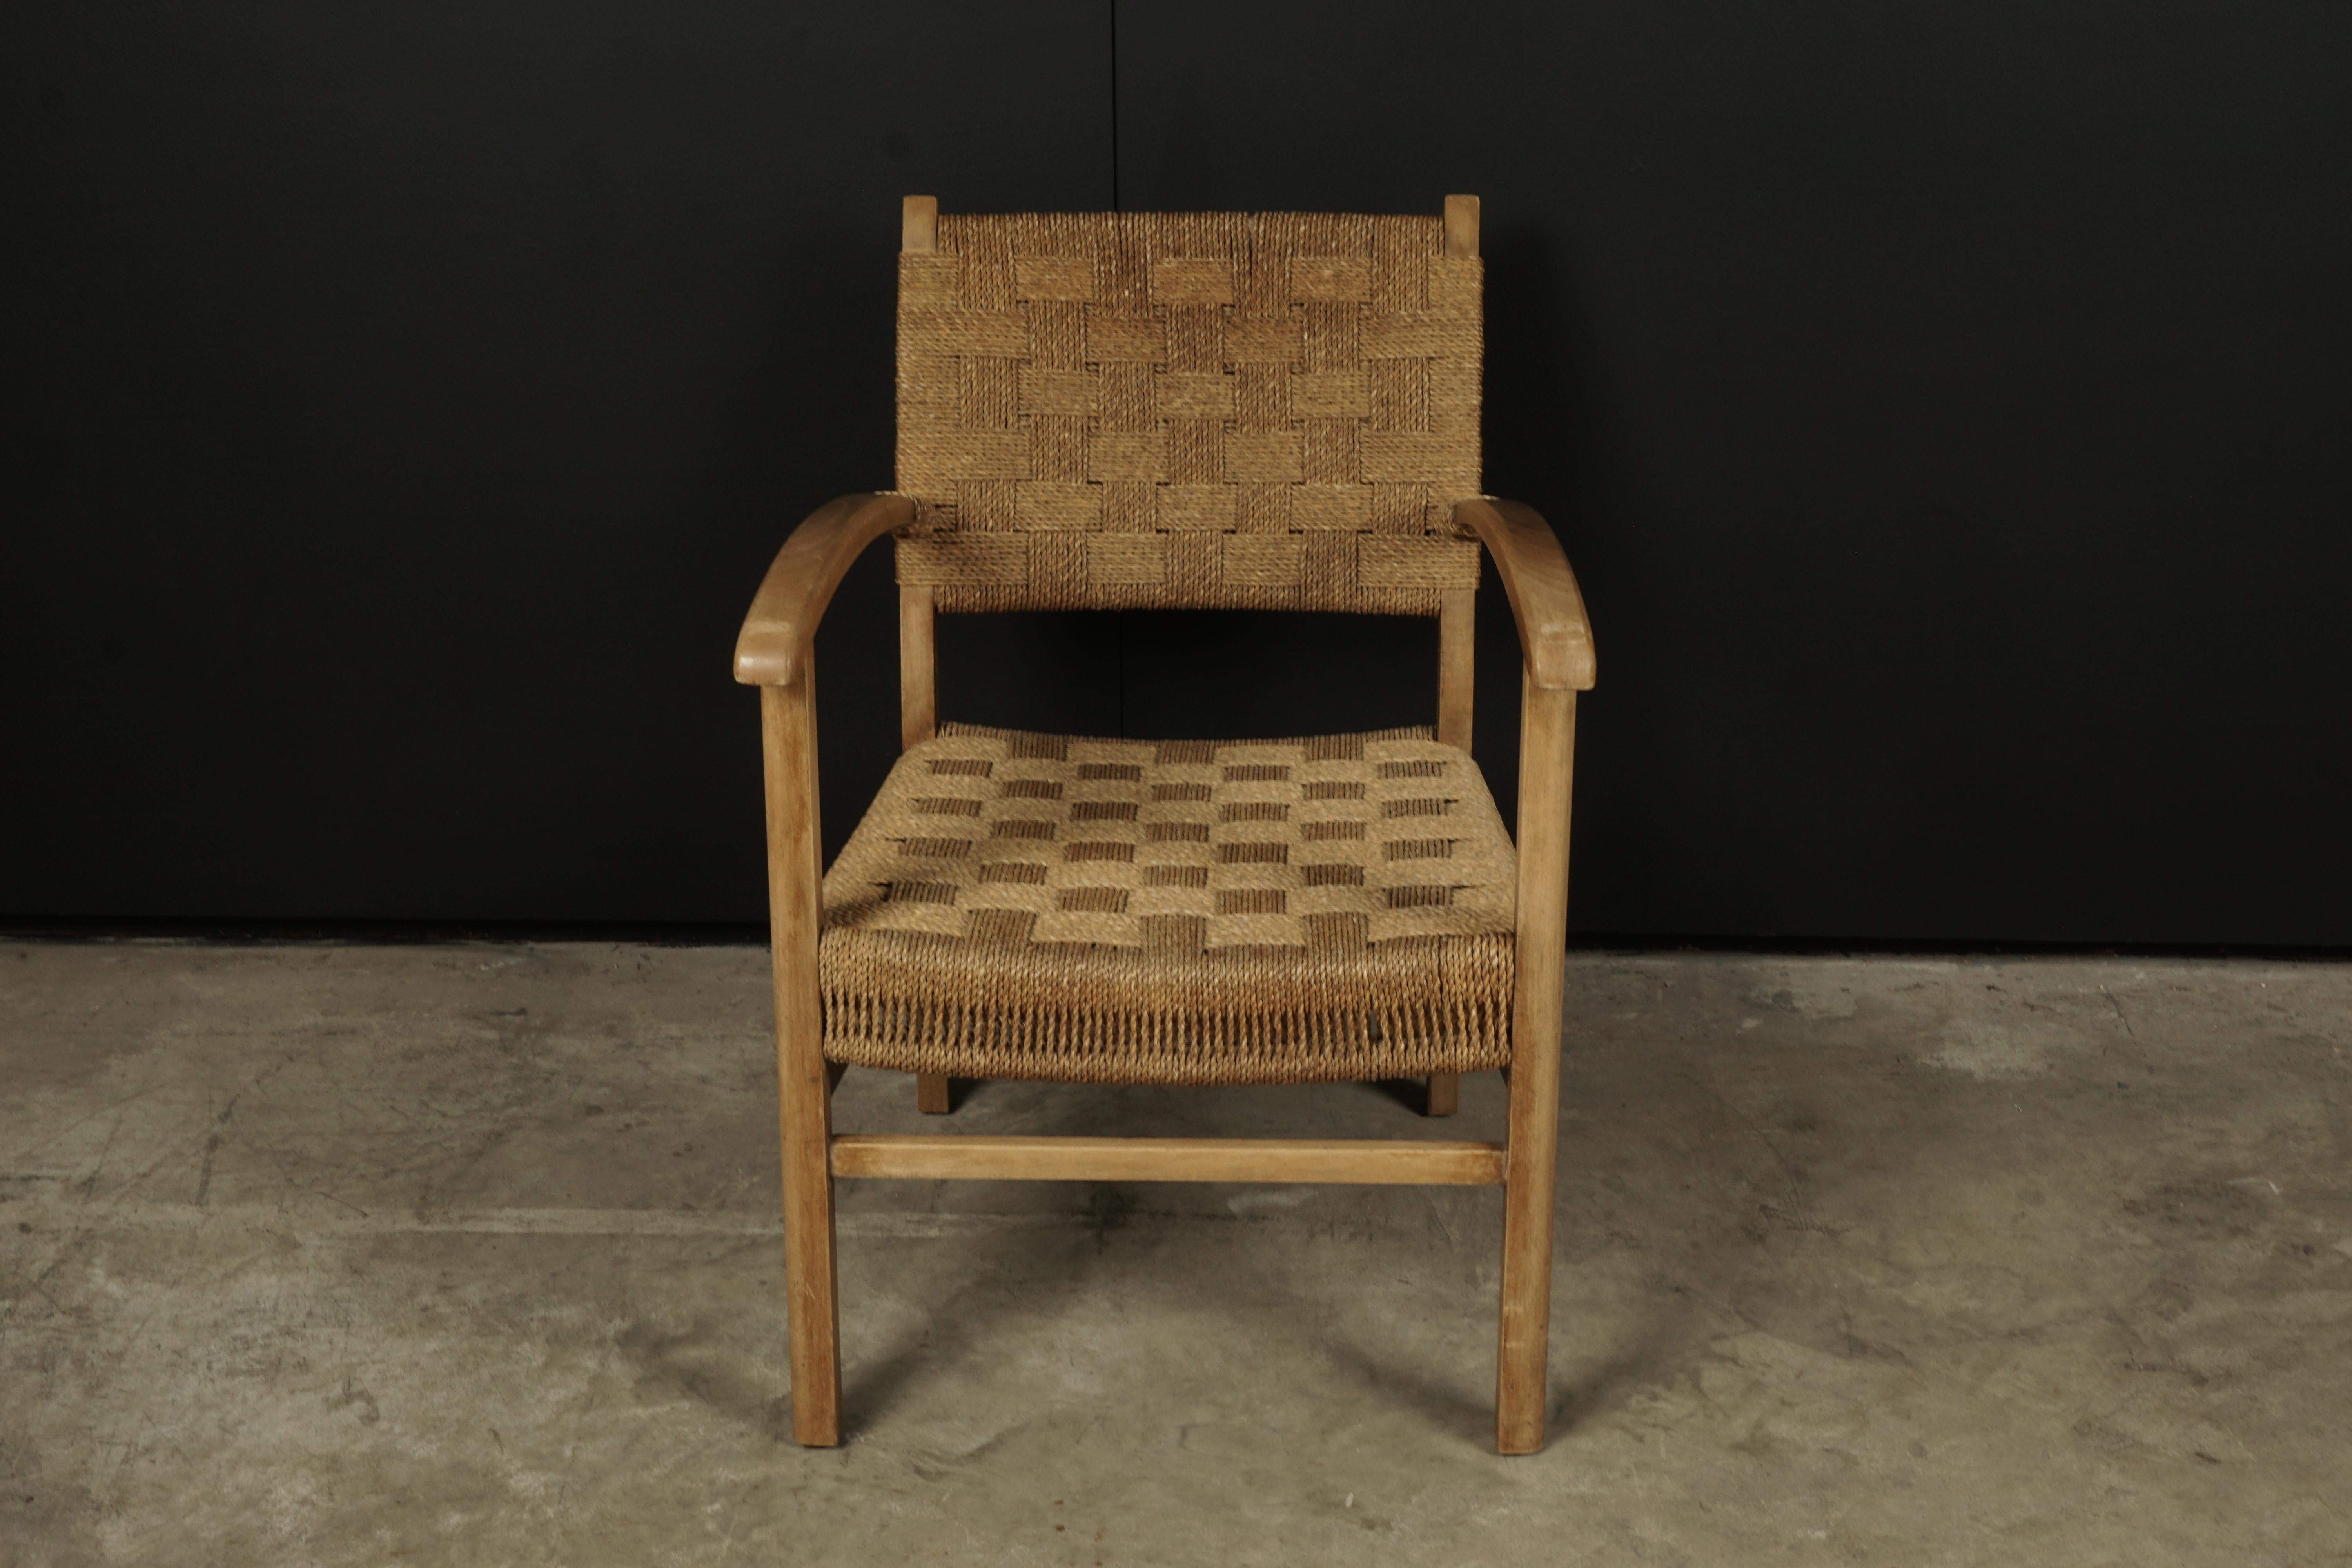 Midcentury lounge chair from Denmark, circa 1960. Woven paperboard seat and back on a solid birch frame. Nice wear and patina.